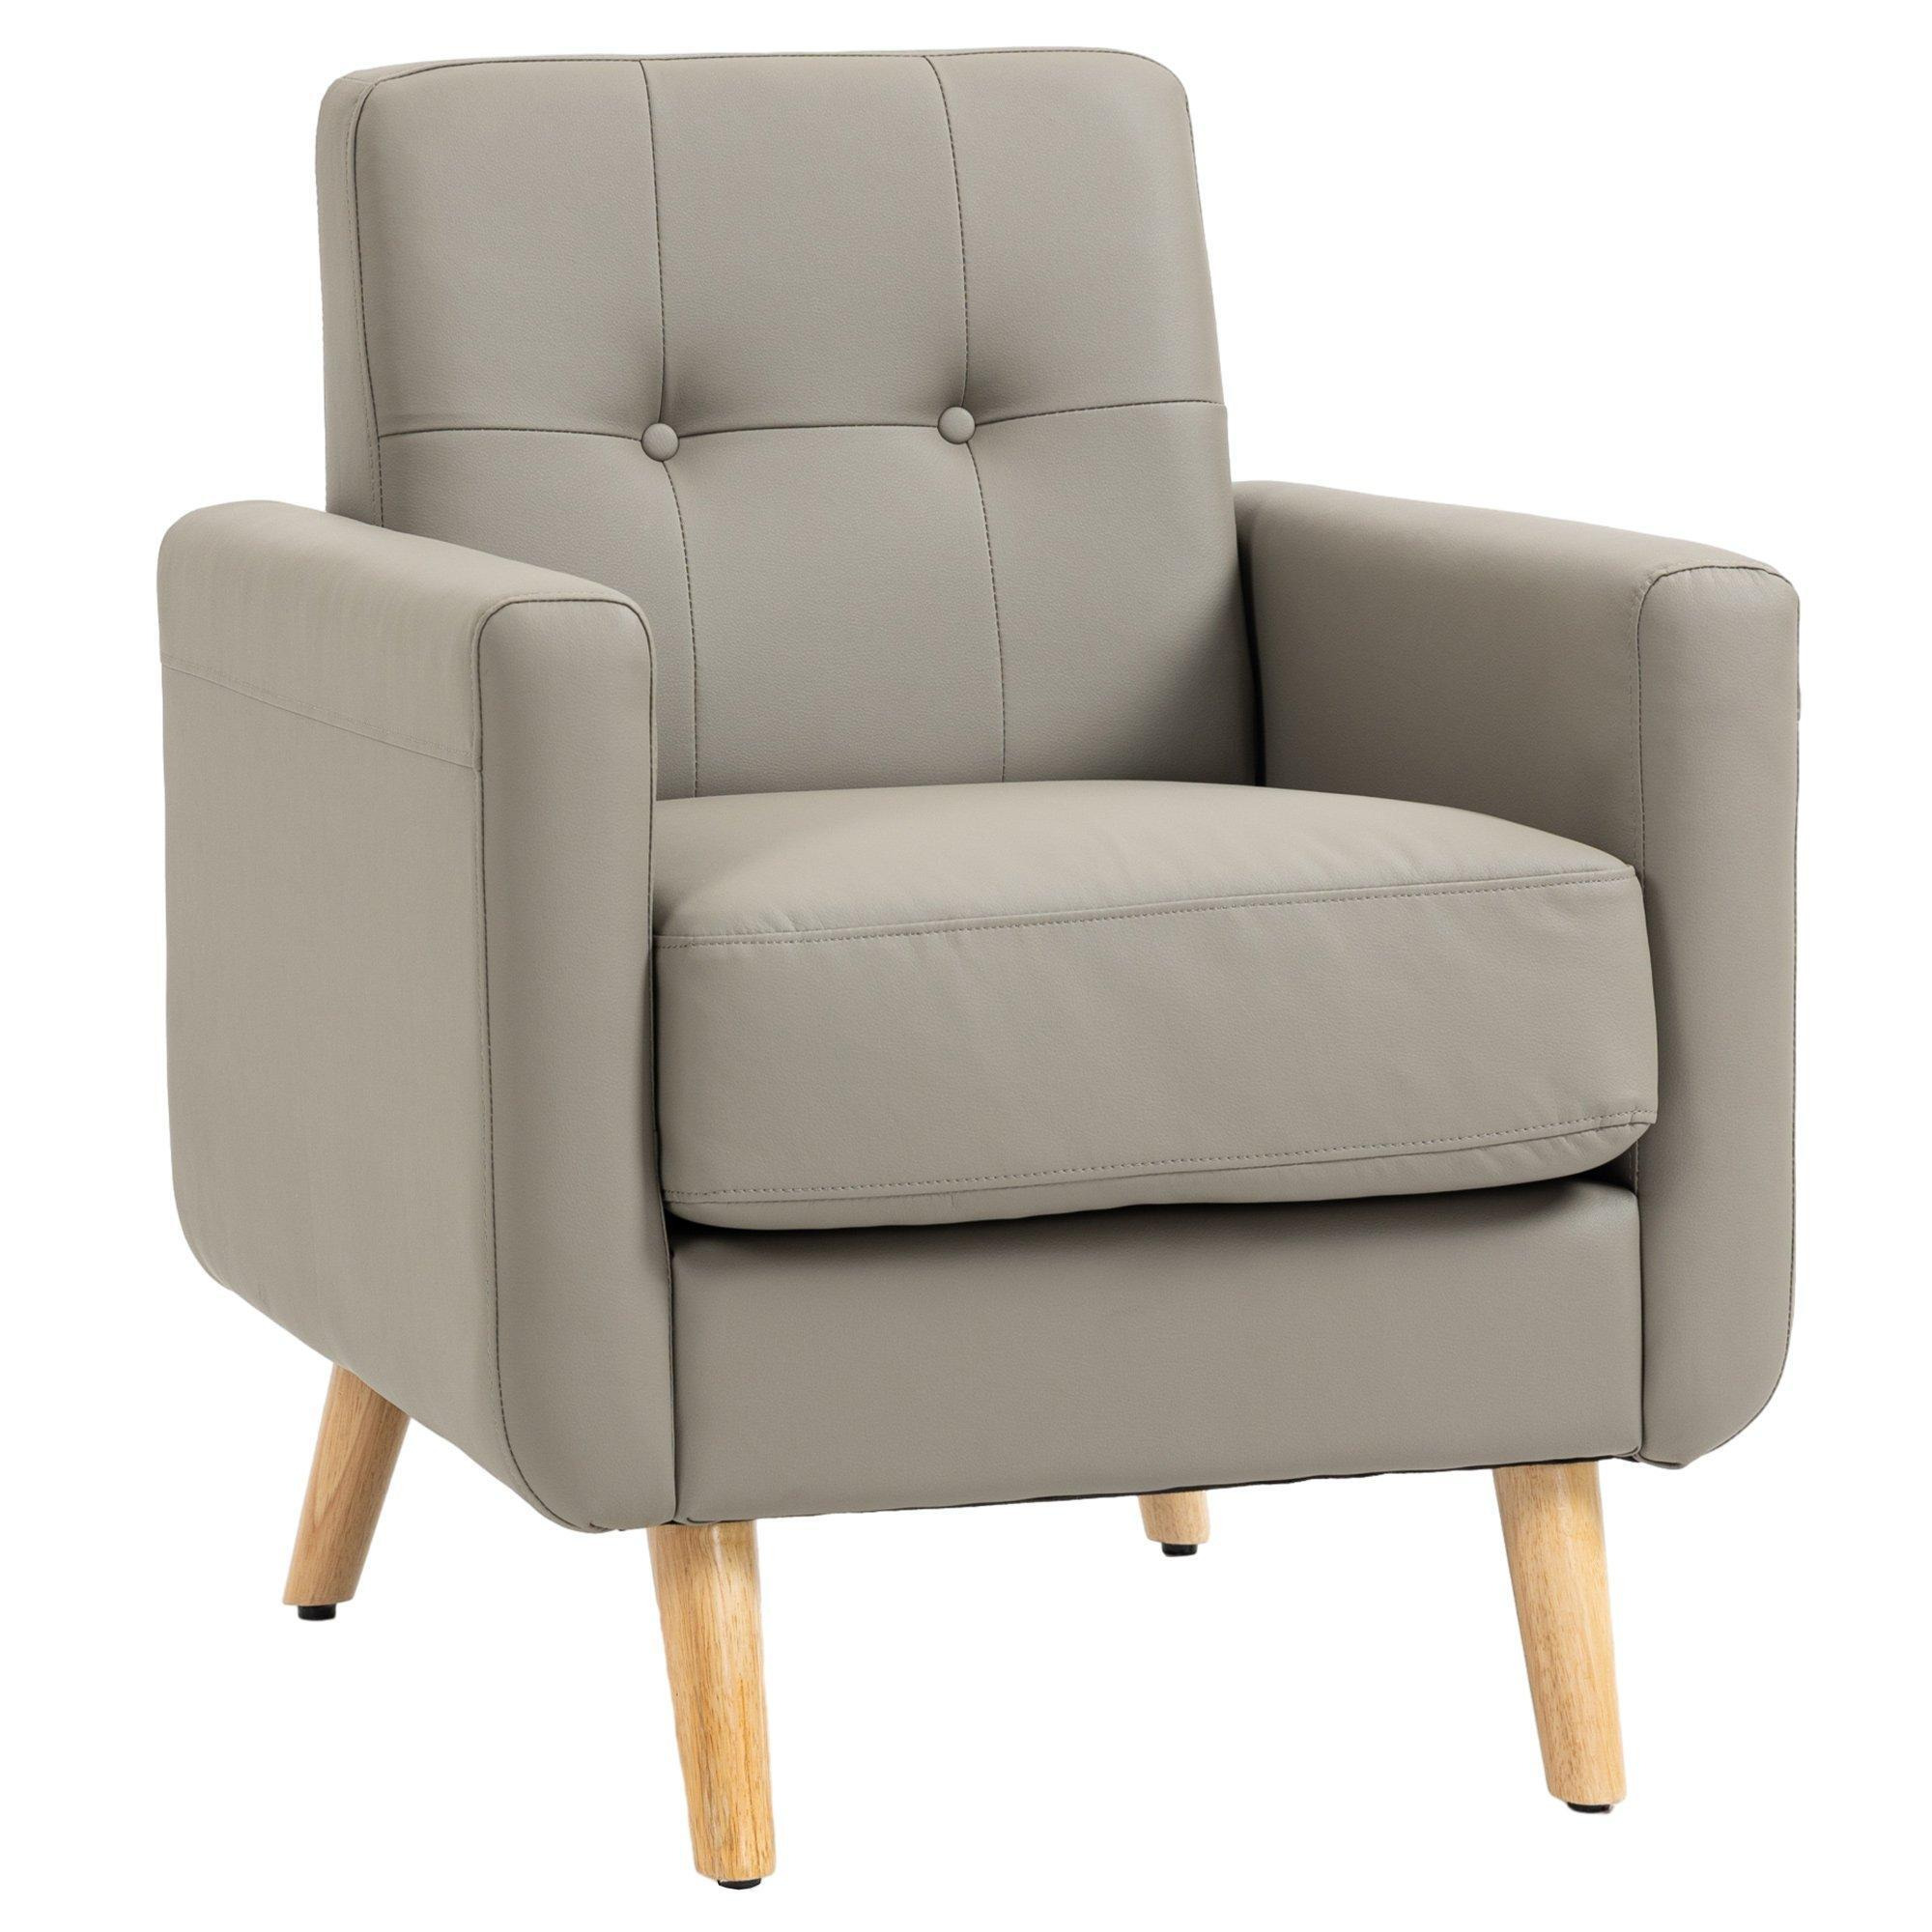 Armchair Upholstered Fireside Chair with Tufted Back for Living Room - image 1